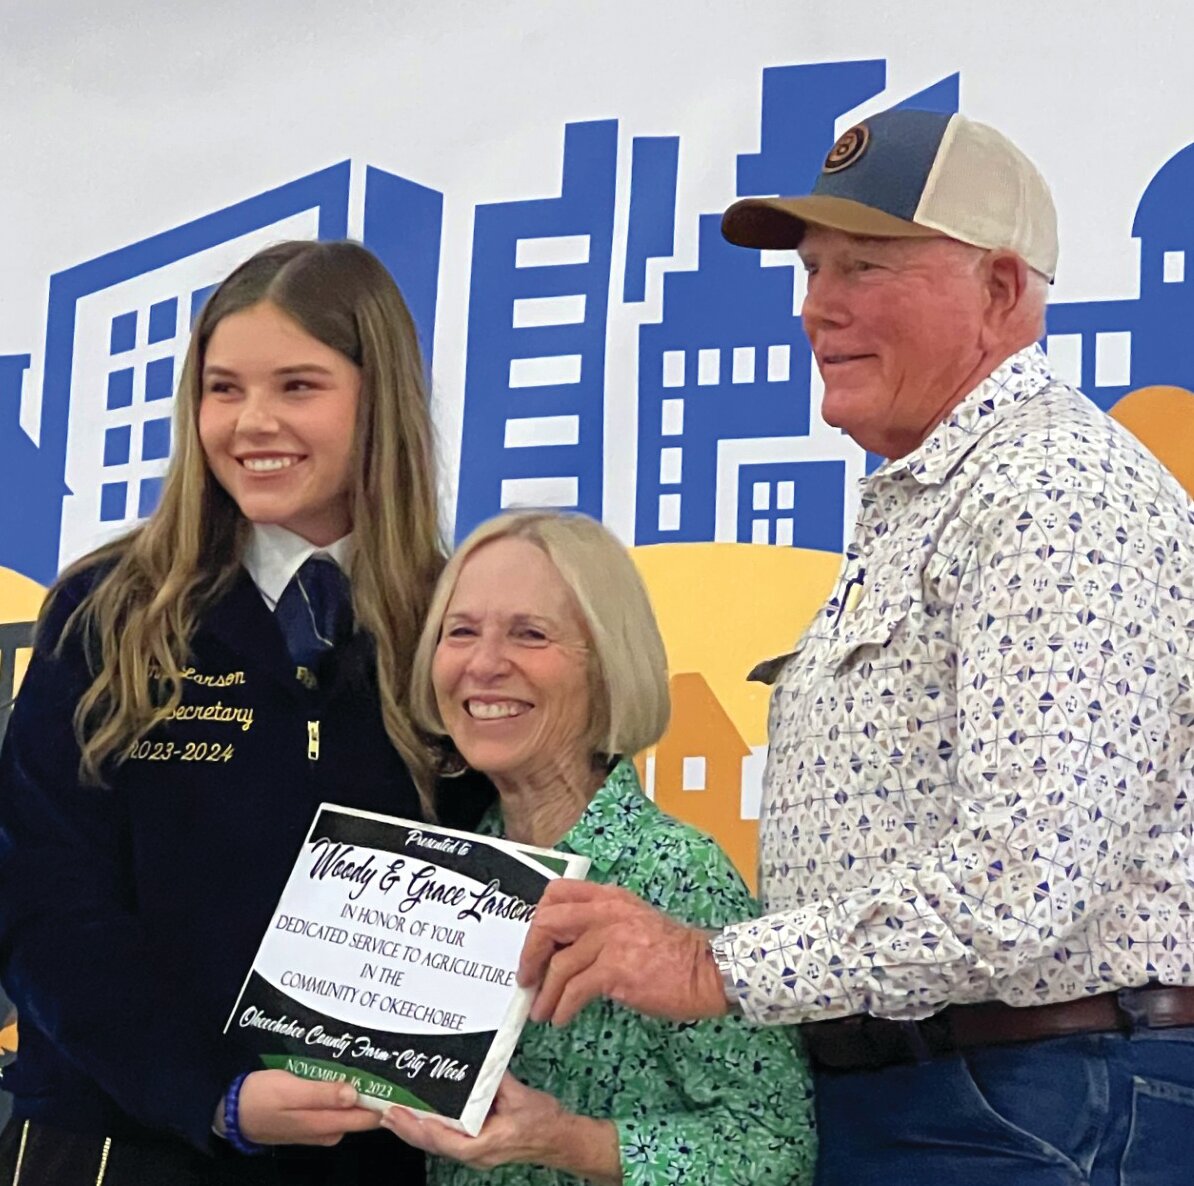 OKEECHOBEE -- Florida FFA State Secretary Jenna Larson (left) presented Grace and Woody Larson with the award for Dedicated Service to Agriculture in the Community of Okeechobee at the Nov. 16 Farm City Week Luncheon at the Okeechobee County Agri-Civic Center.